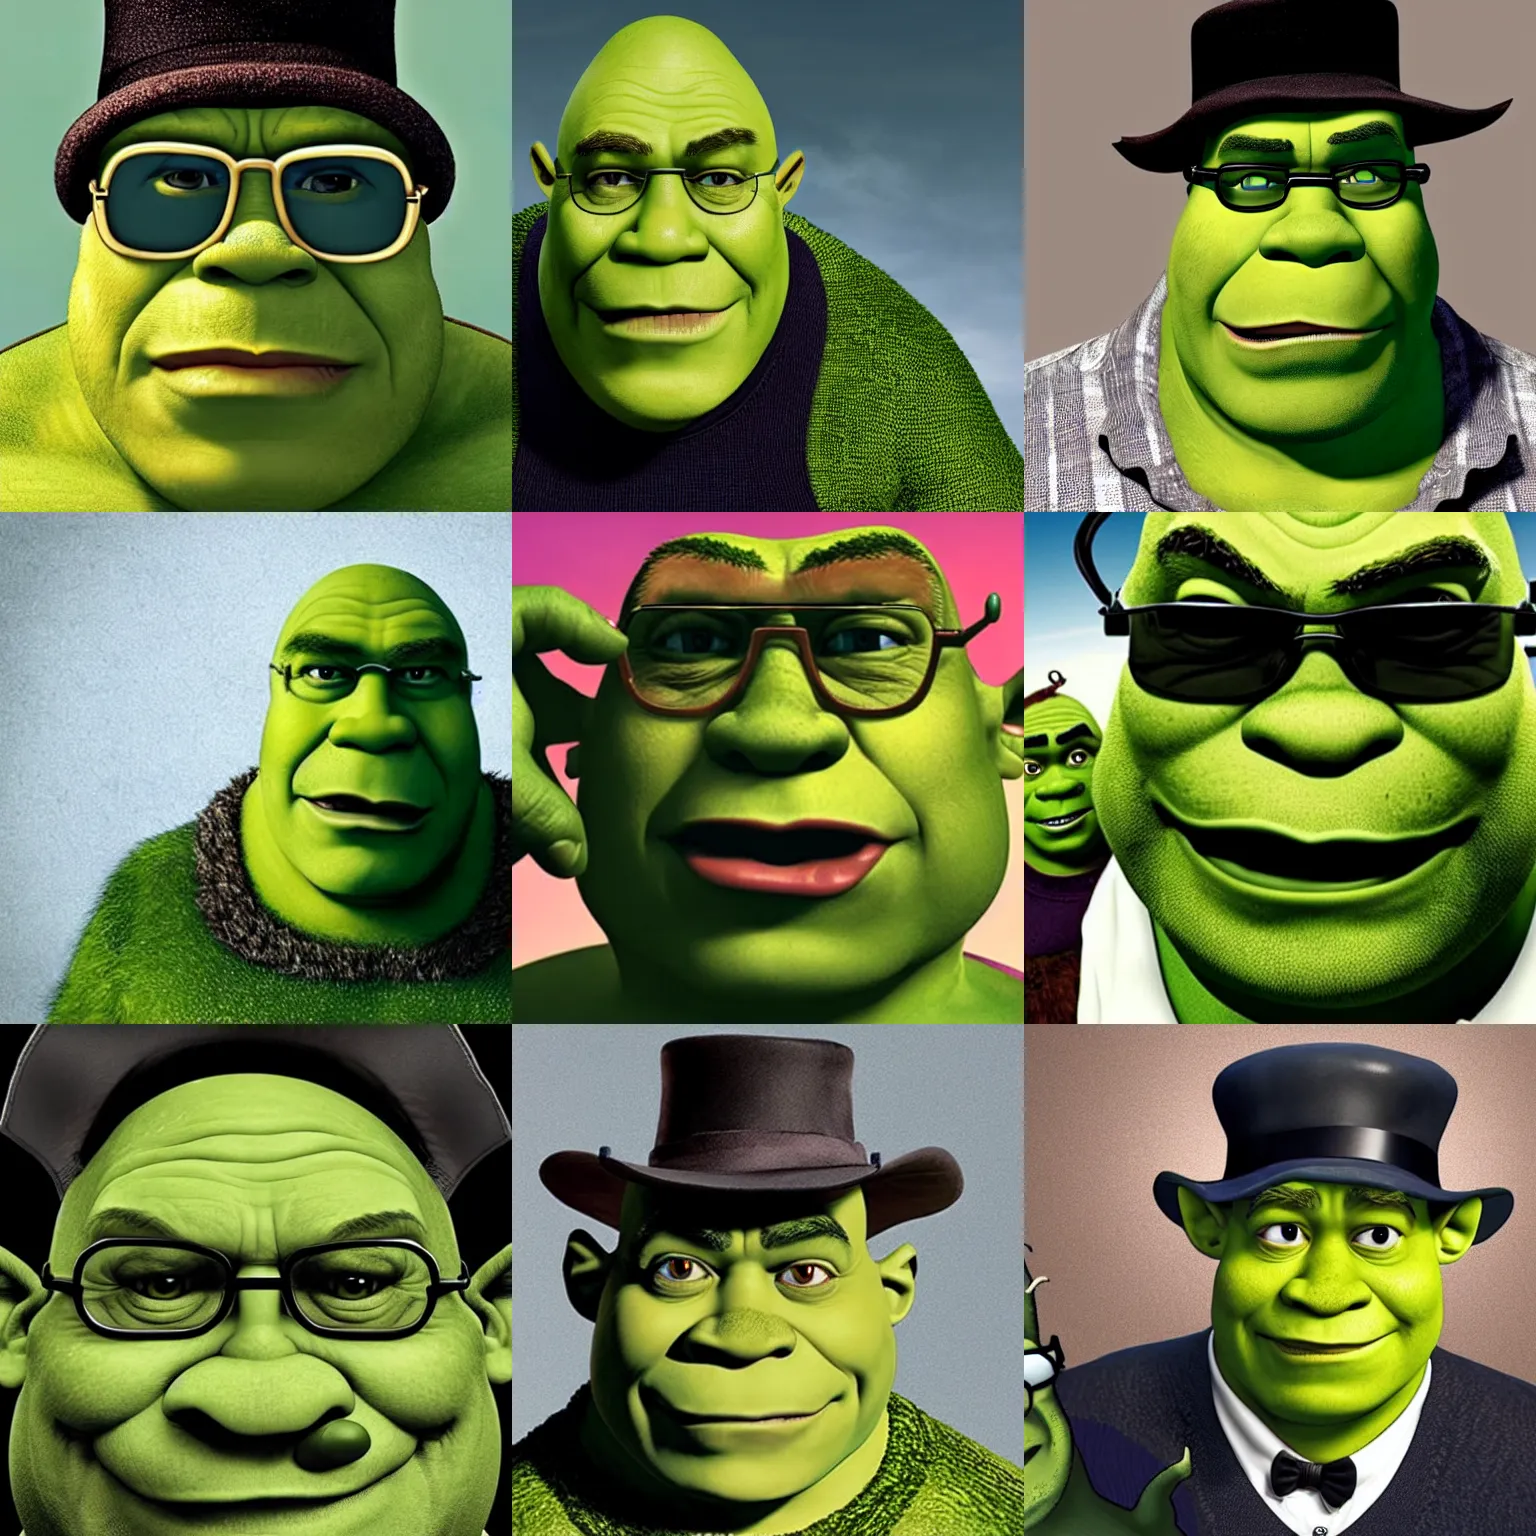 Prompt: shrek ogre that looks like walter white from breaking bad, wearing bowler hat and sunglasses